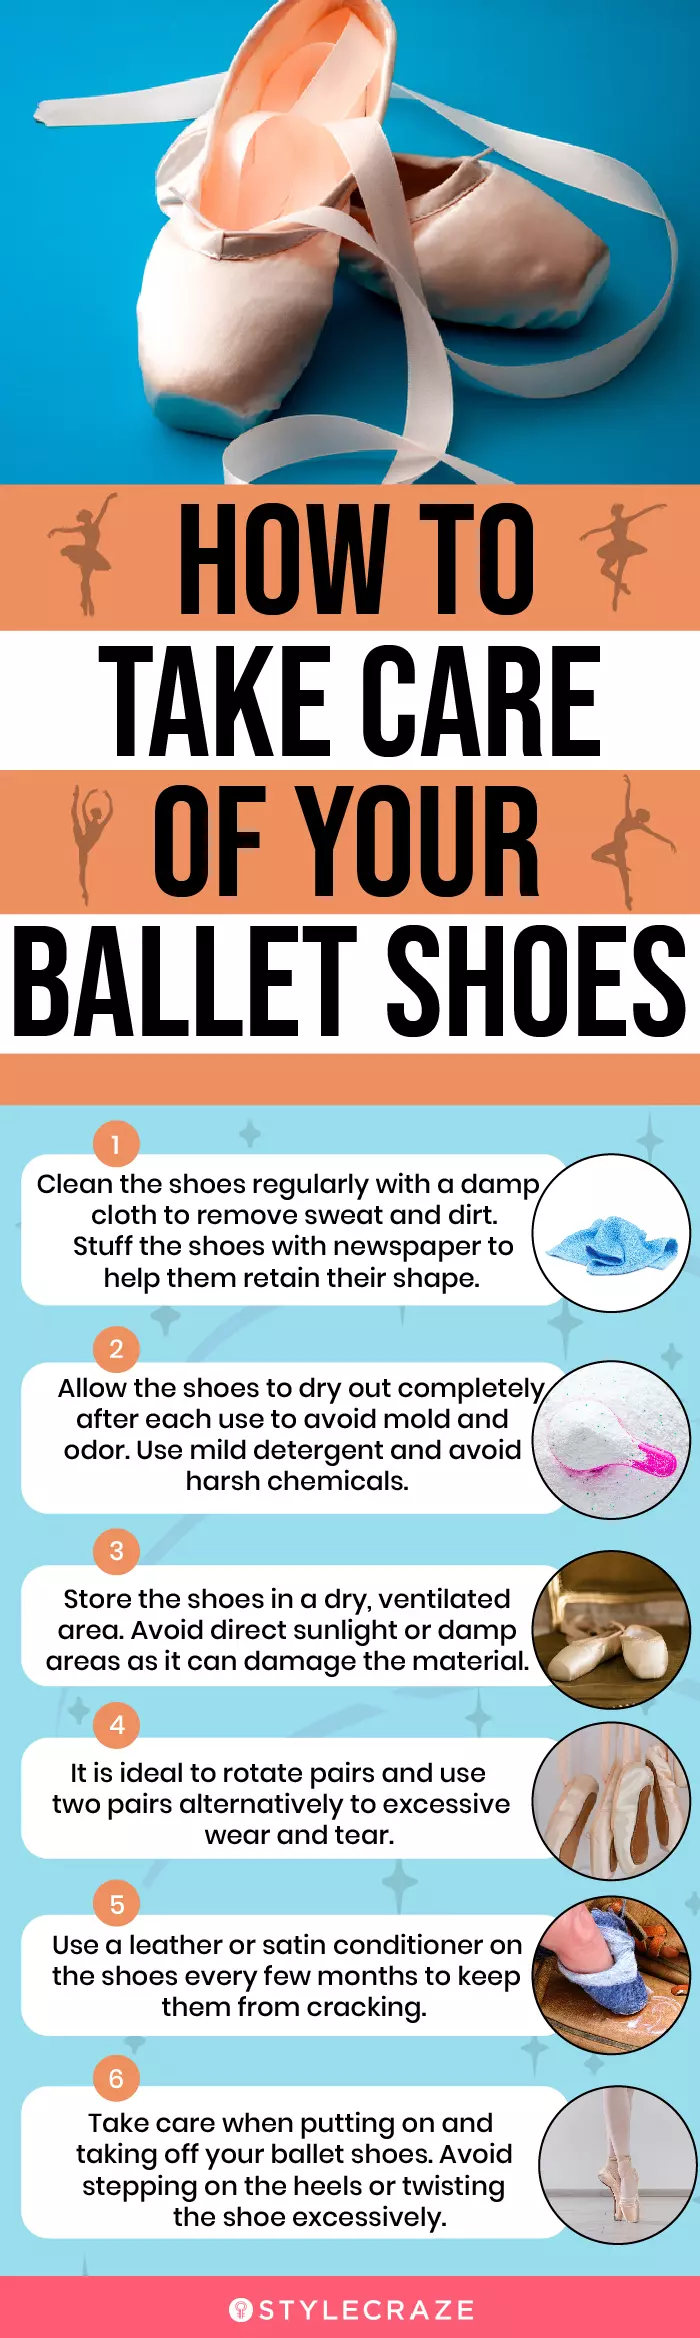 How To Take Care Of Your Ballet Shoes (infographic)